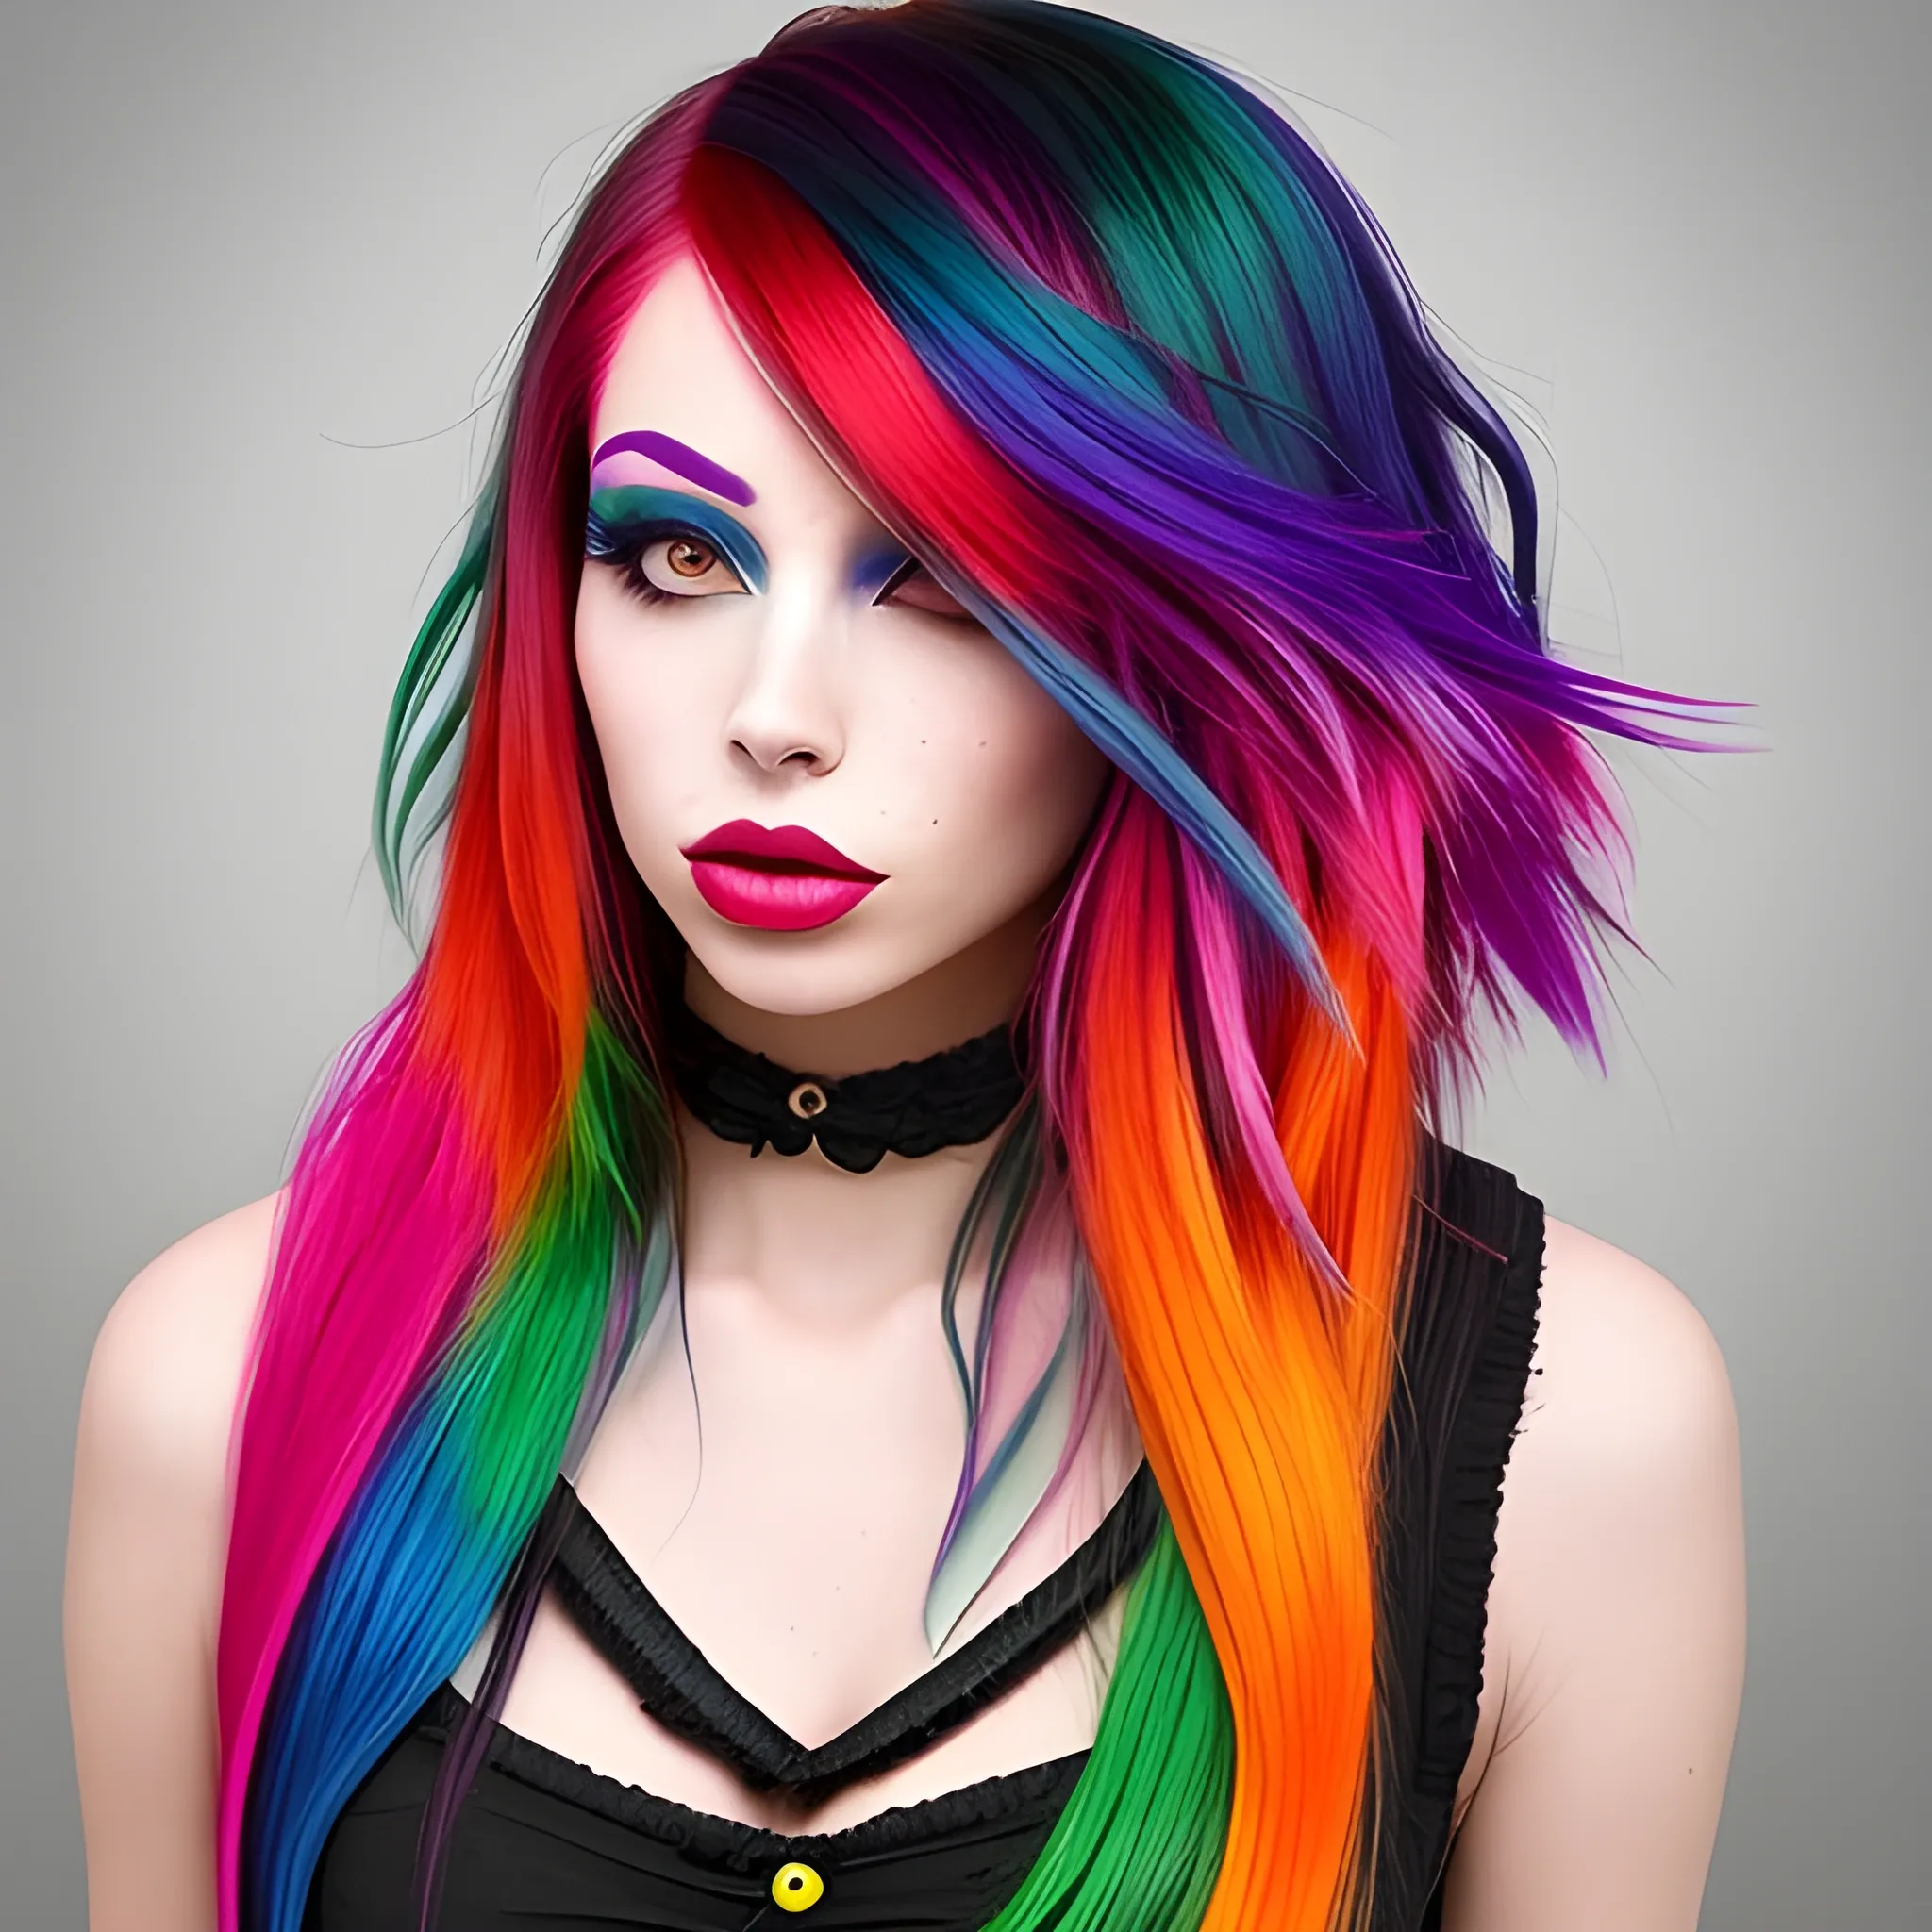 The very attractive woman is wearing multicolored hair, vibrant color scheme, fully body, Trippy